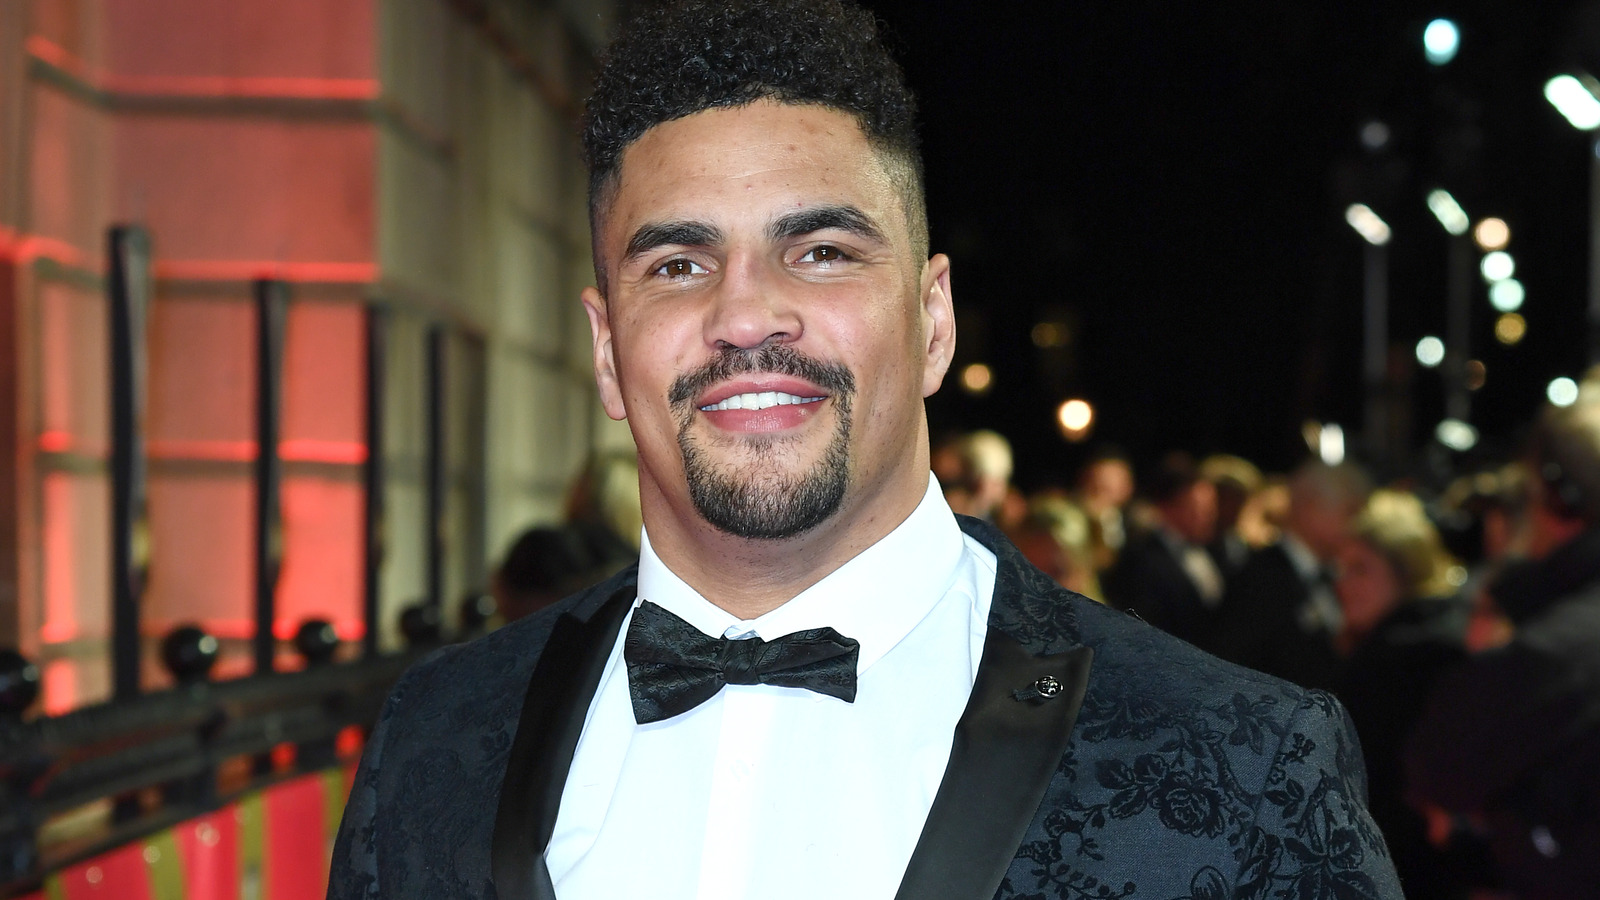 Backstage Update On Anthony Ogogo's AEW Roster Status